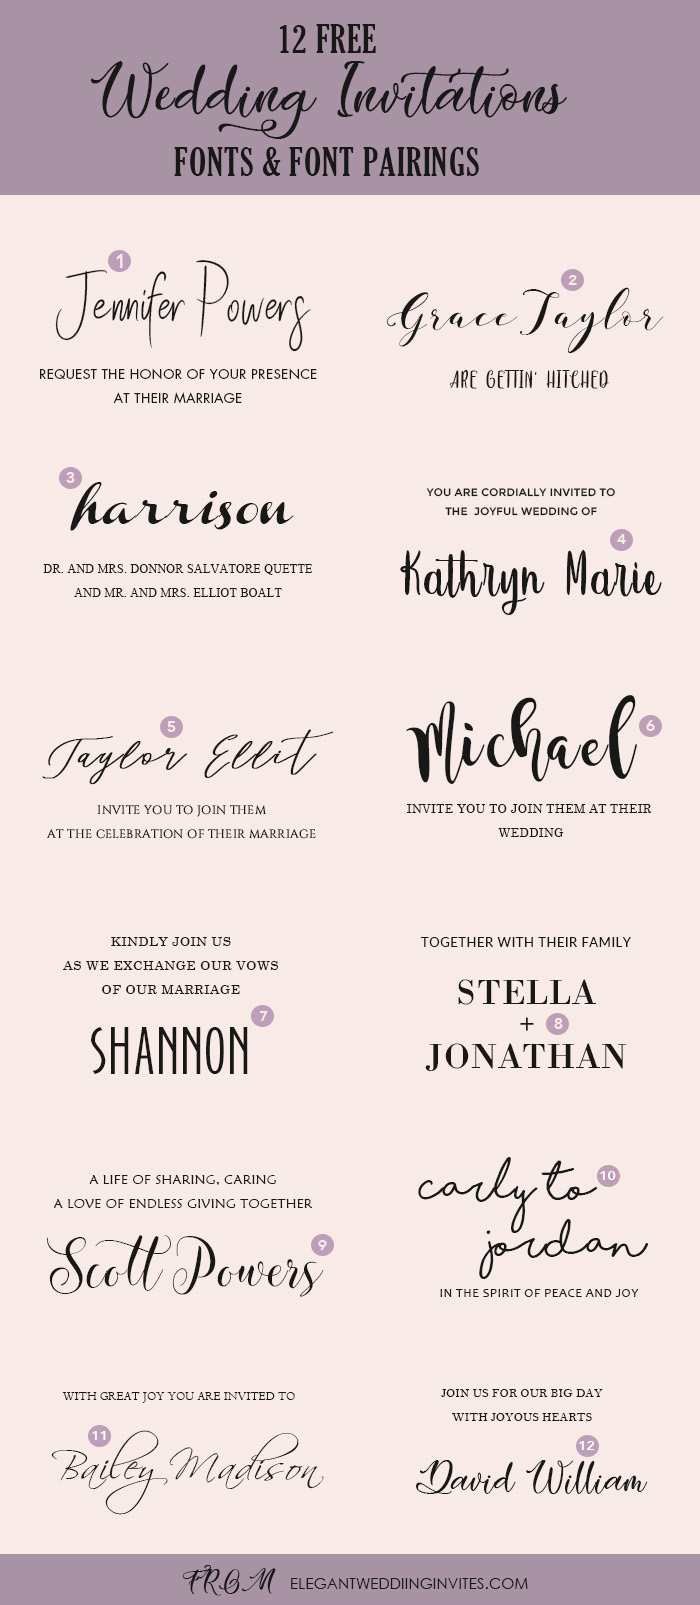 Wedding Invite Fonts Wedding Invitation Font Pairing Guide With Free Killer Fonts To